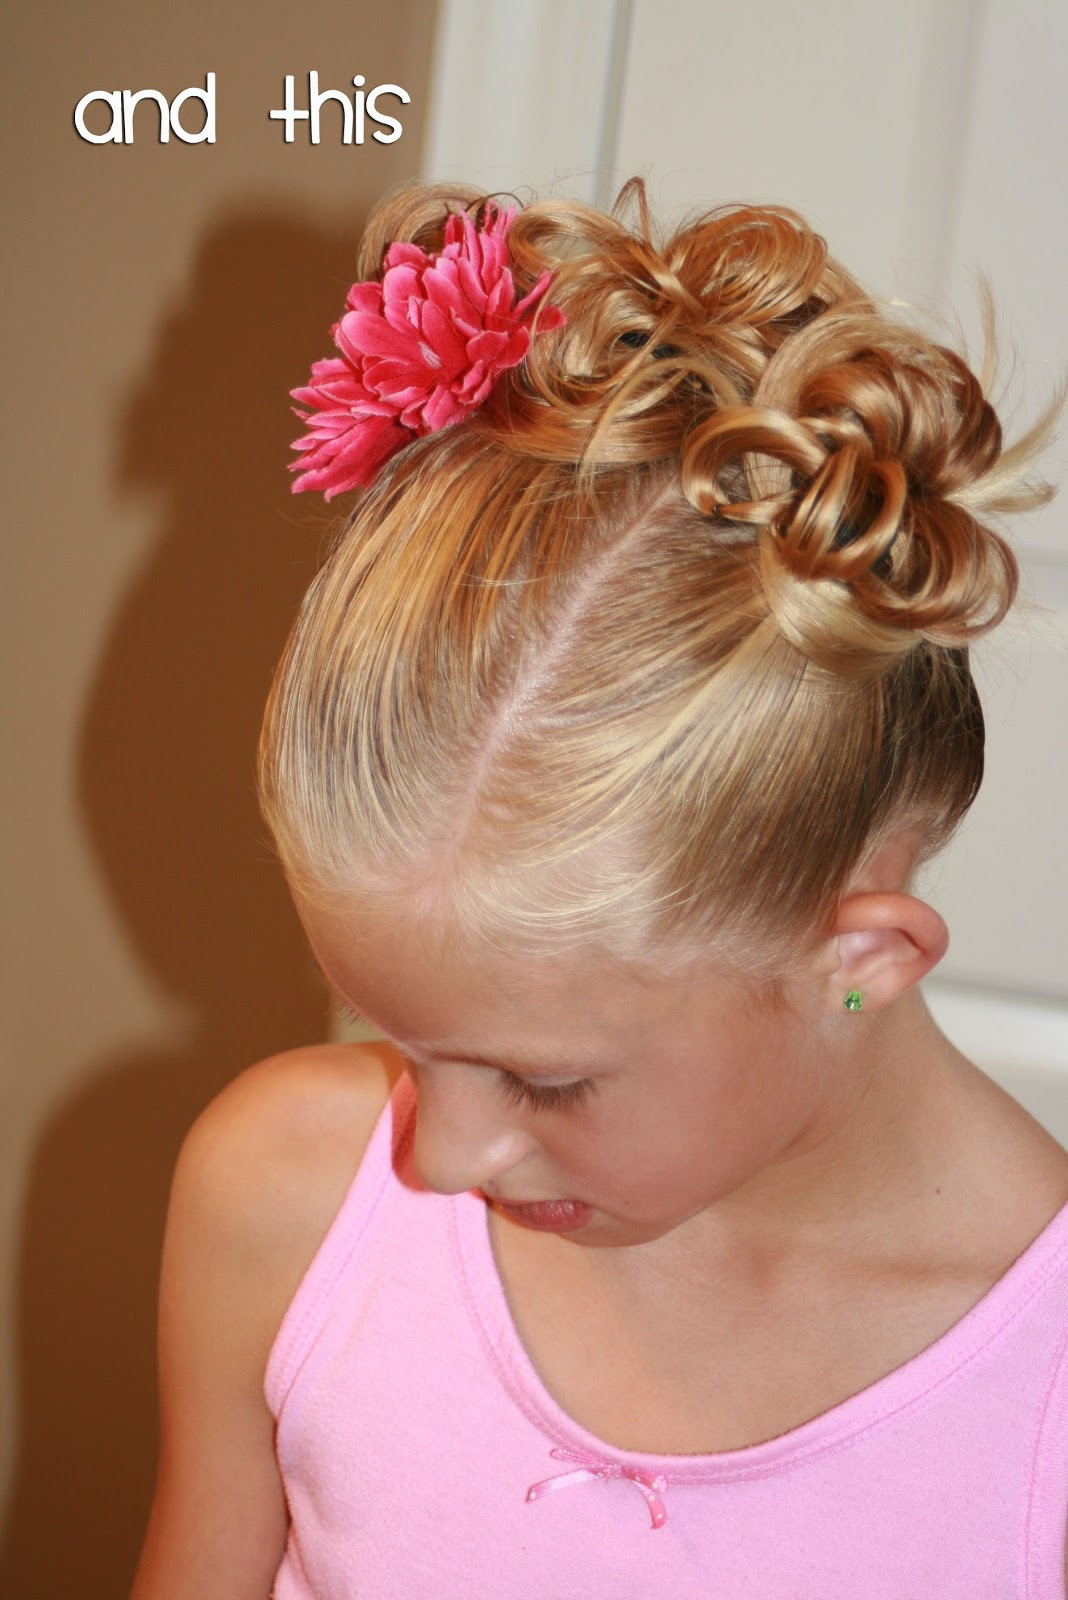 Cute Easy Hairstyles For Little Girls
 Simple Hairstyles For Little Girls REASONS TO SKIP THE